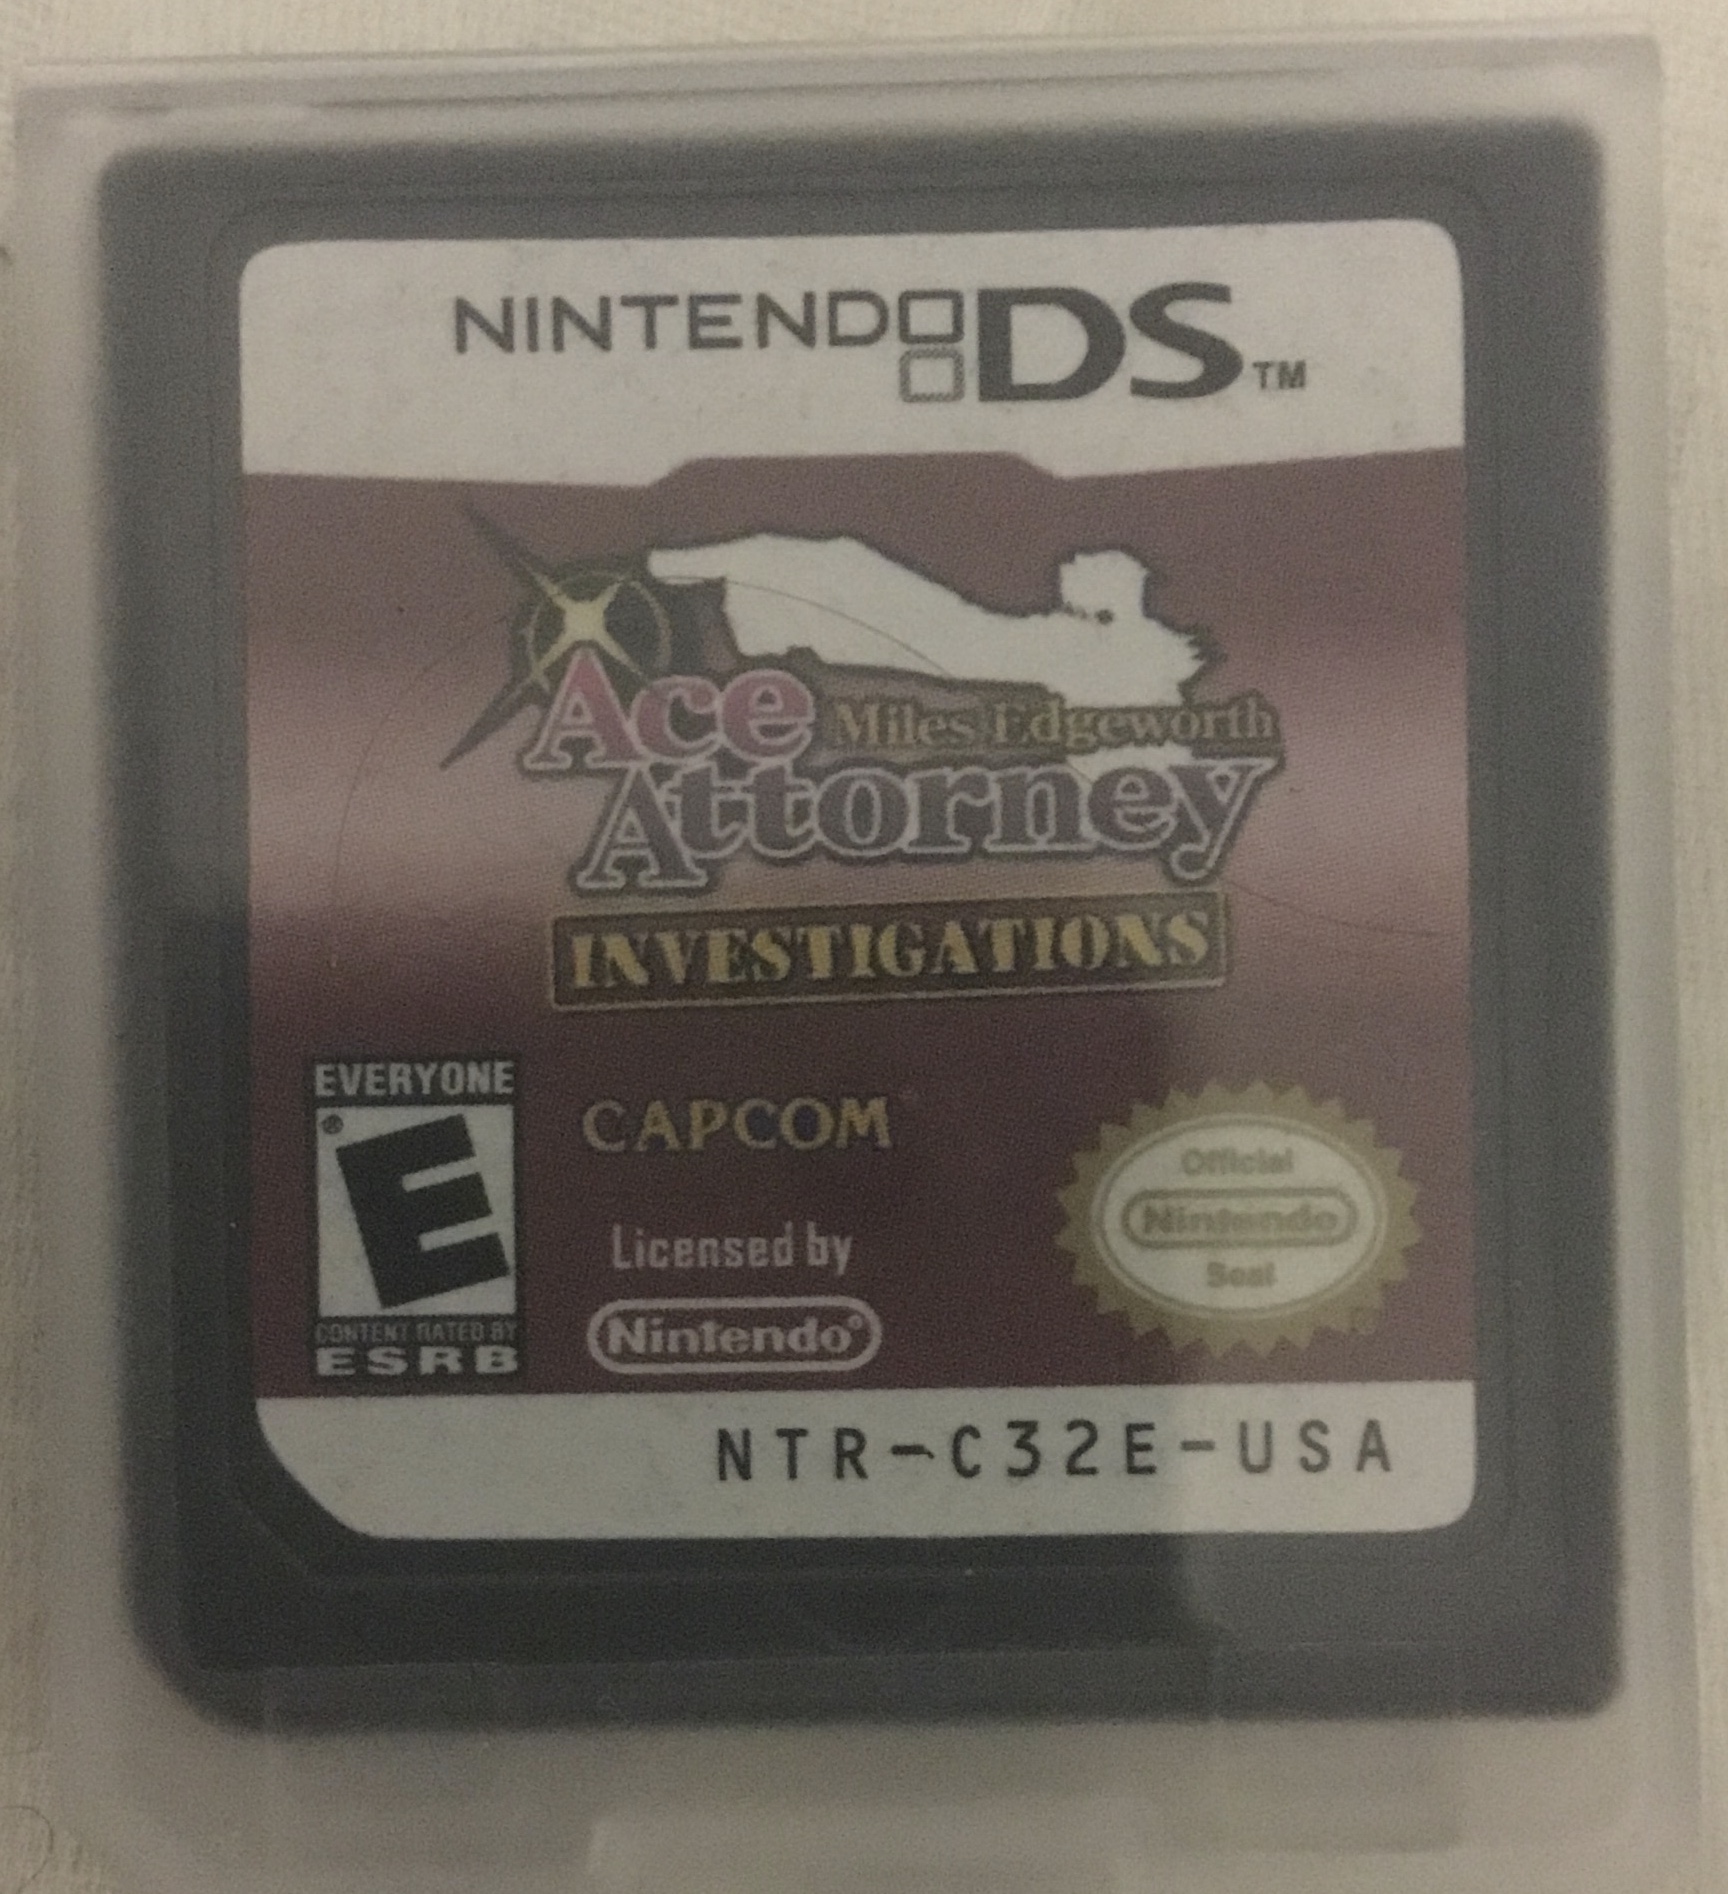 Buy Ace Attorney Investigations: Miles Edgeworth for DS